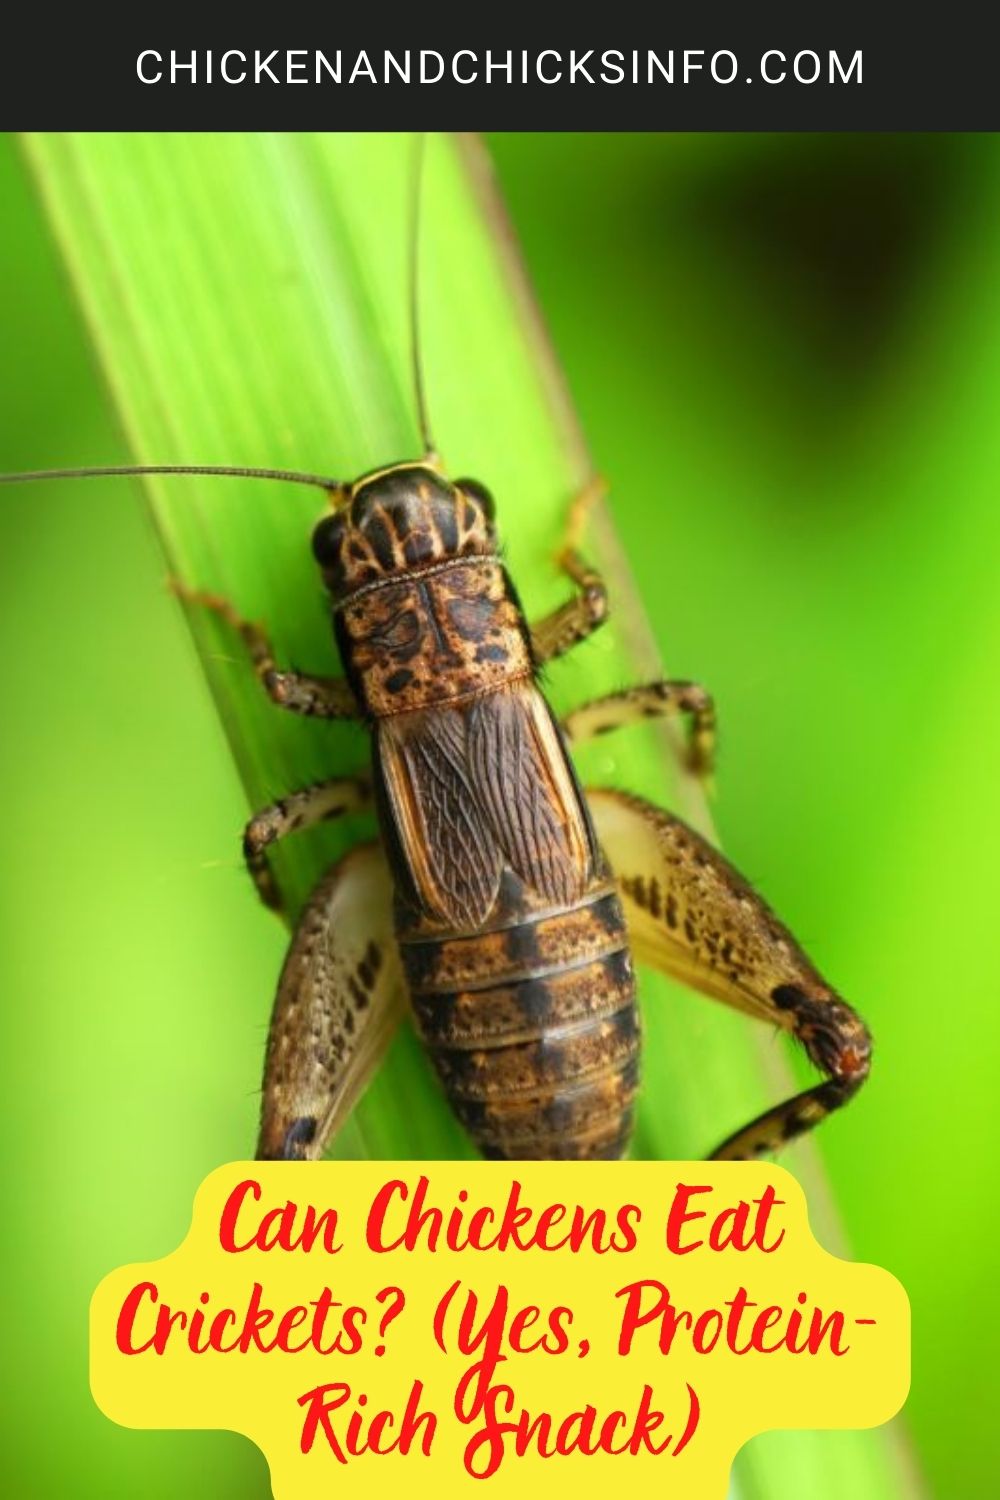 Can Chickens Eat Crickets? (Yes, Protein-Rich Snack) poster.
